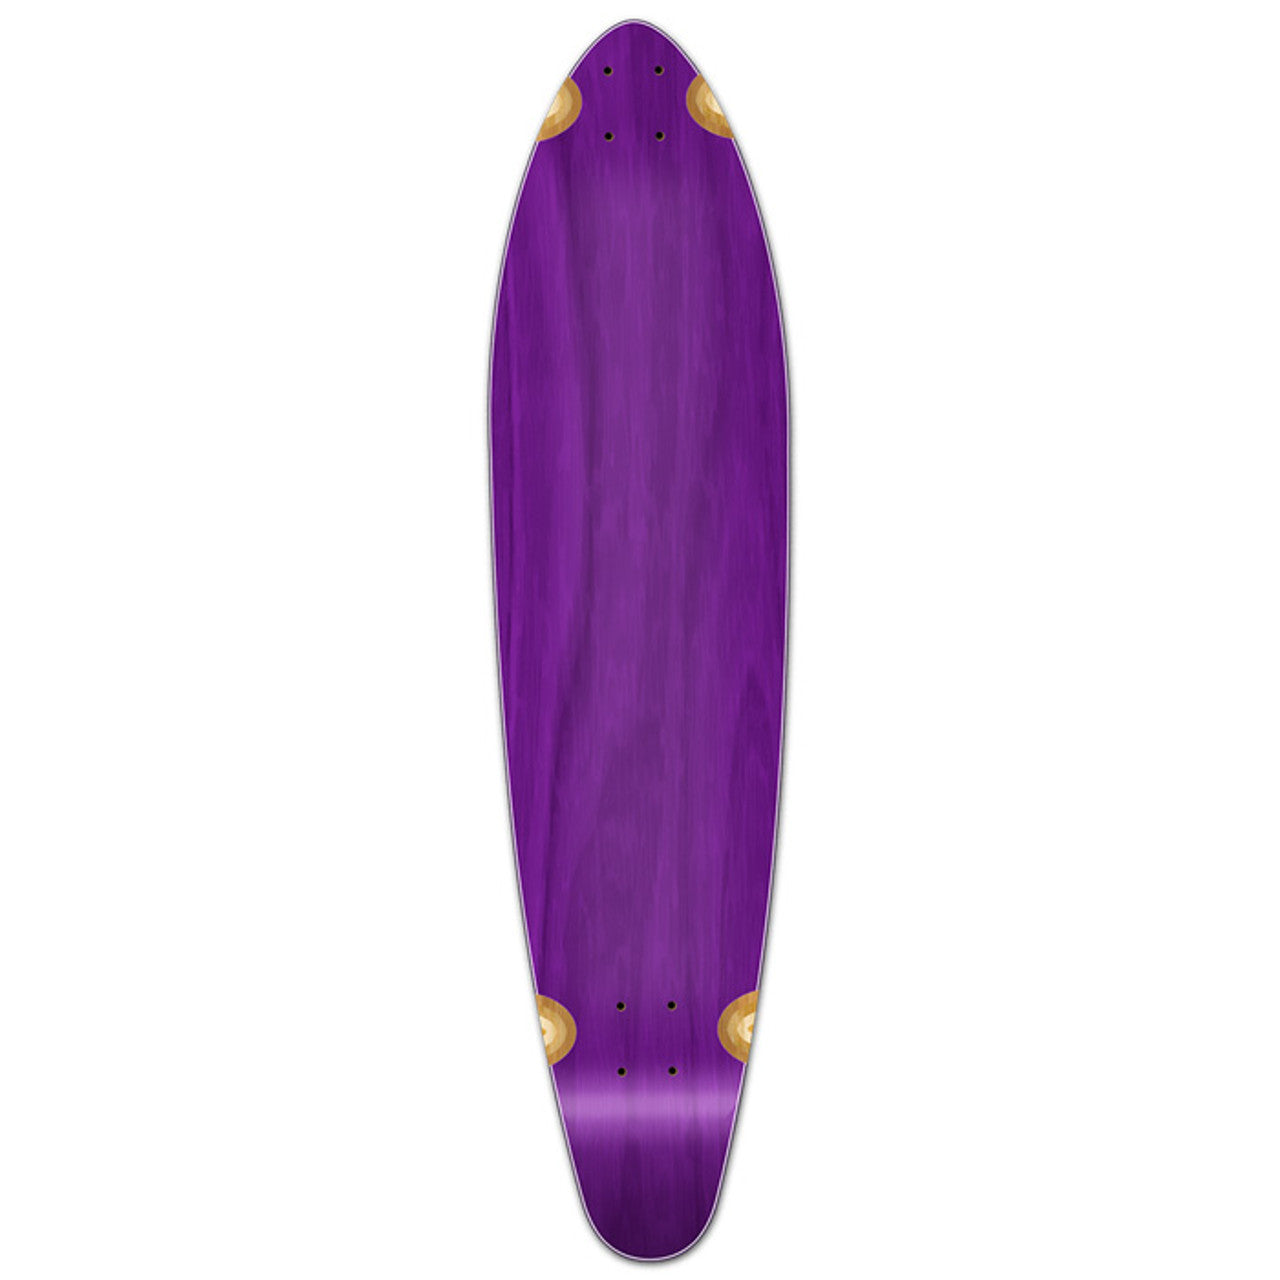 Yocaher Kicktail Longboard Deck - Stained Purple